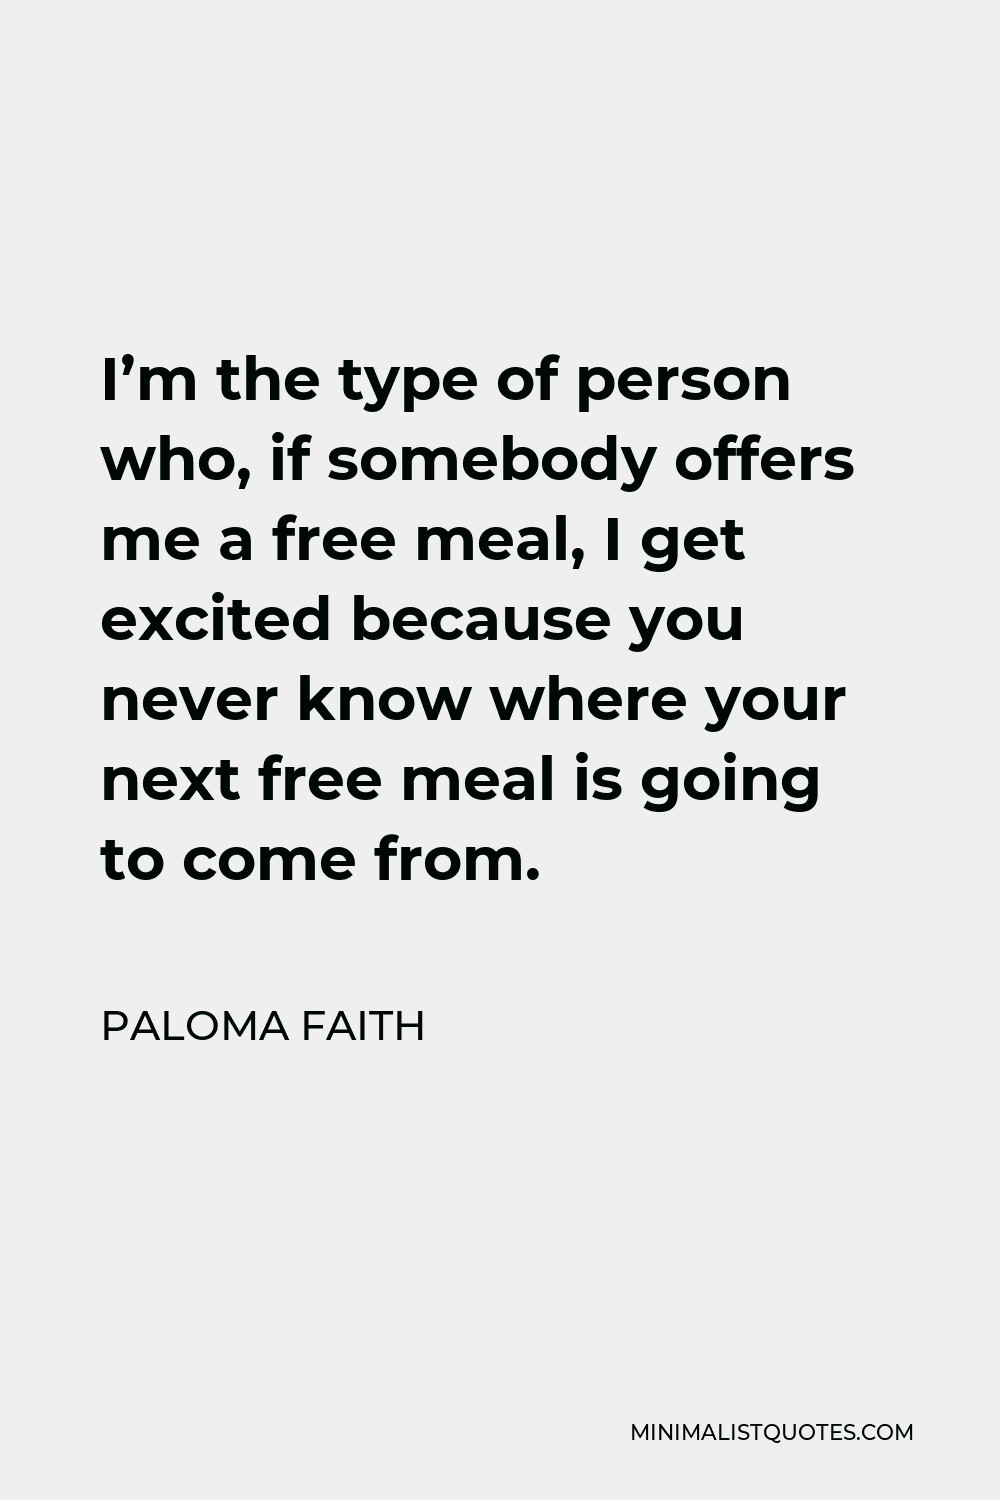 Paloma Faith Quote - I’m the type of person who, if somebody offers me a free meal, I get excited because you never know where your next free meal is going to come from.